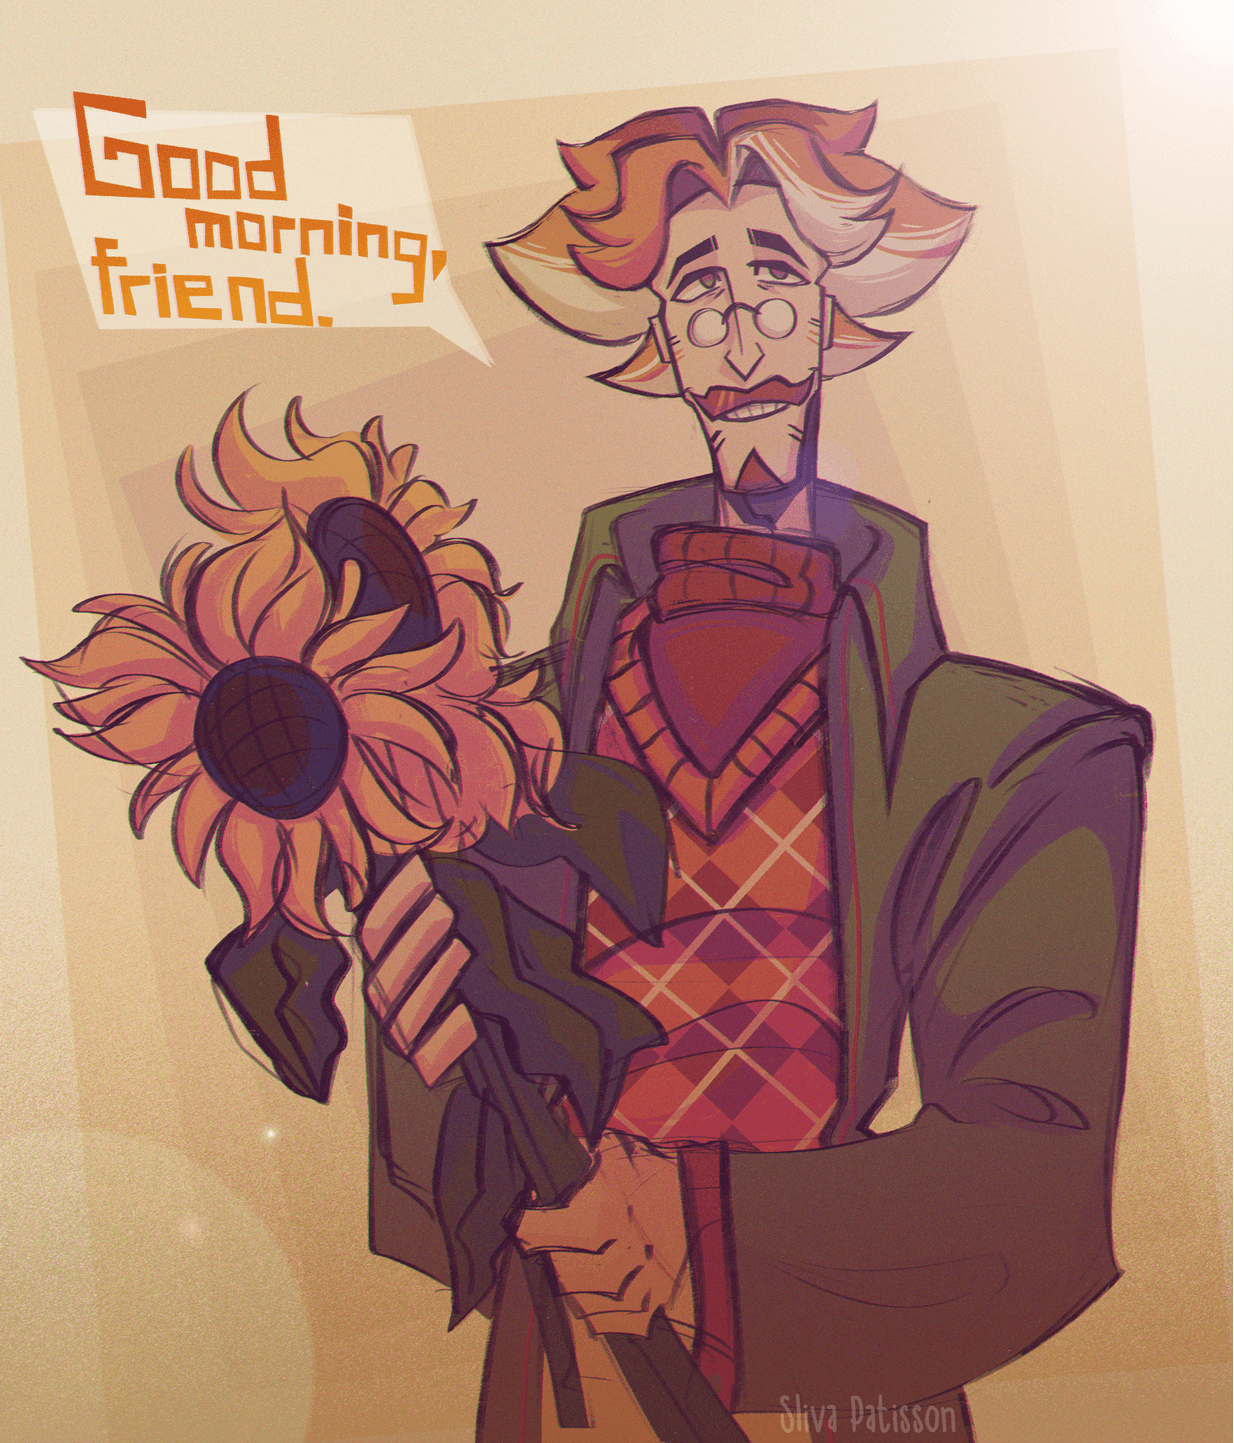 Dr. Sunshine holding sunflowers and greeting